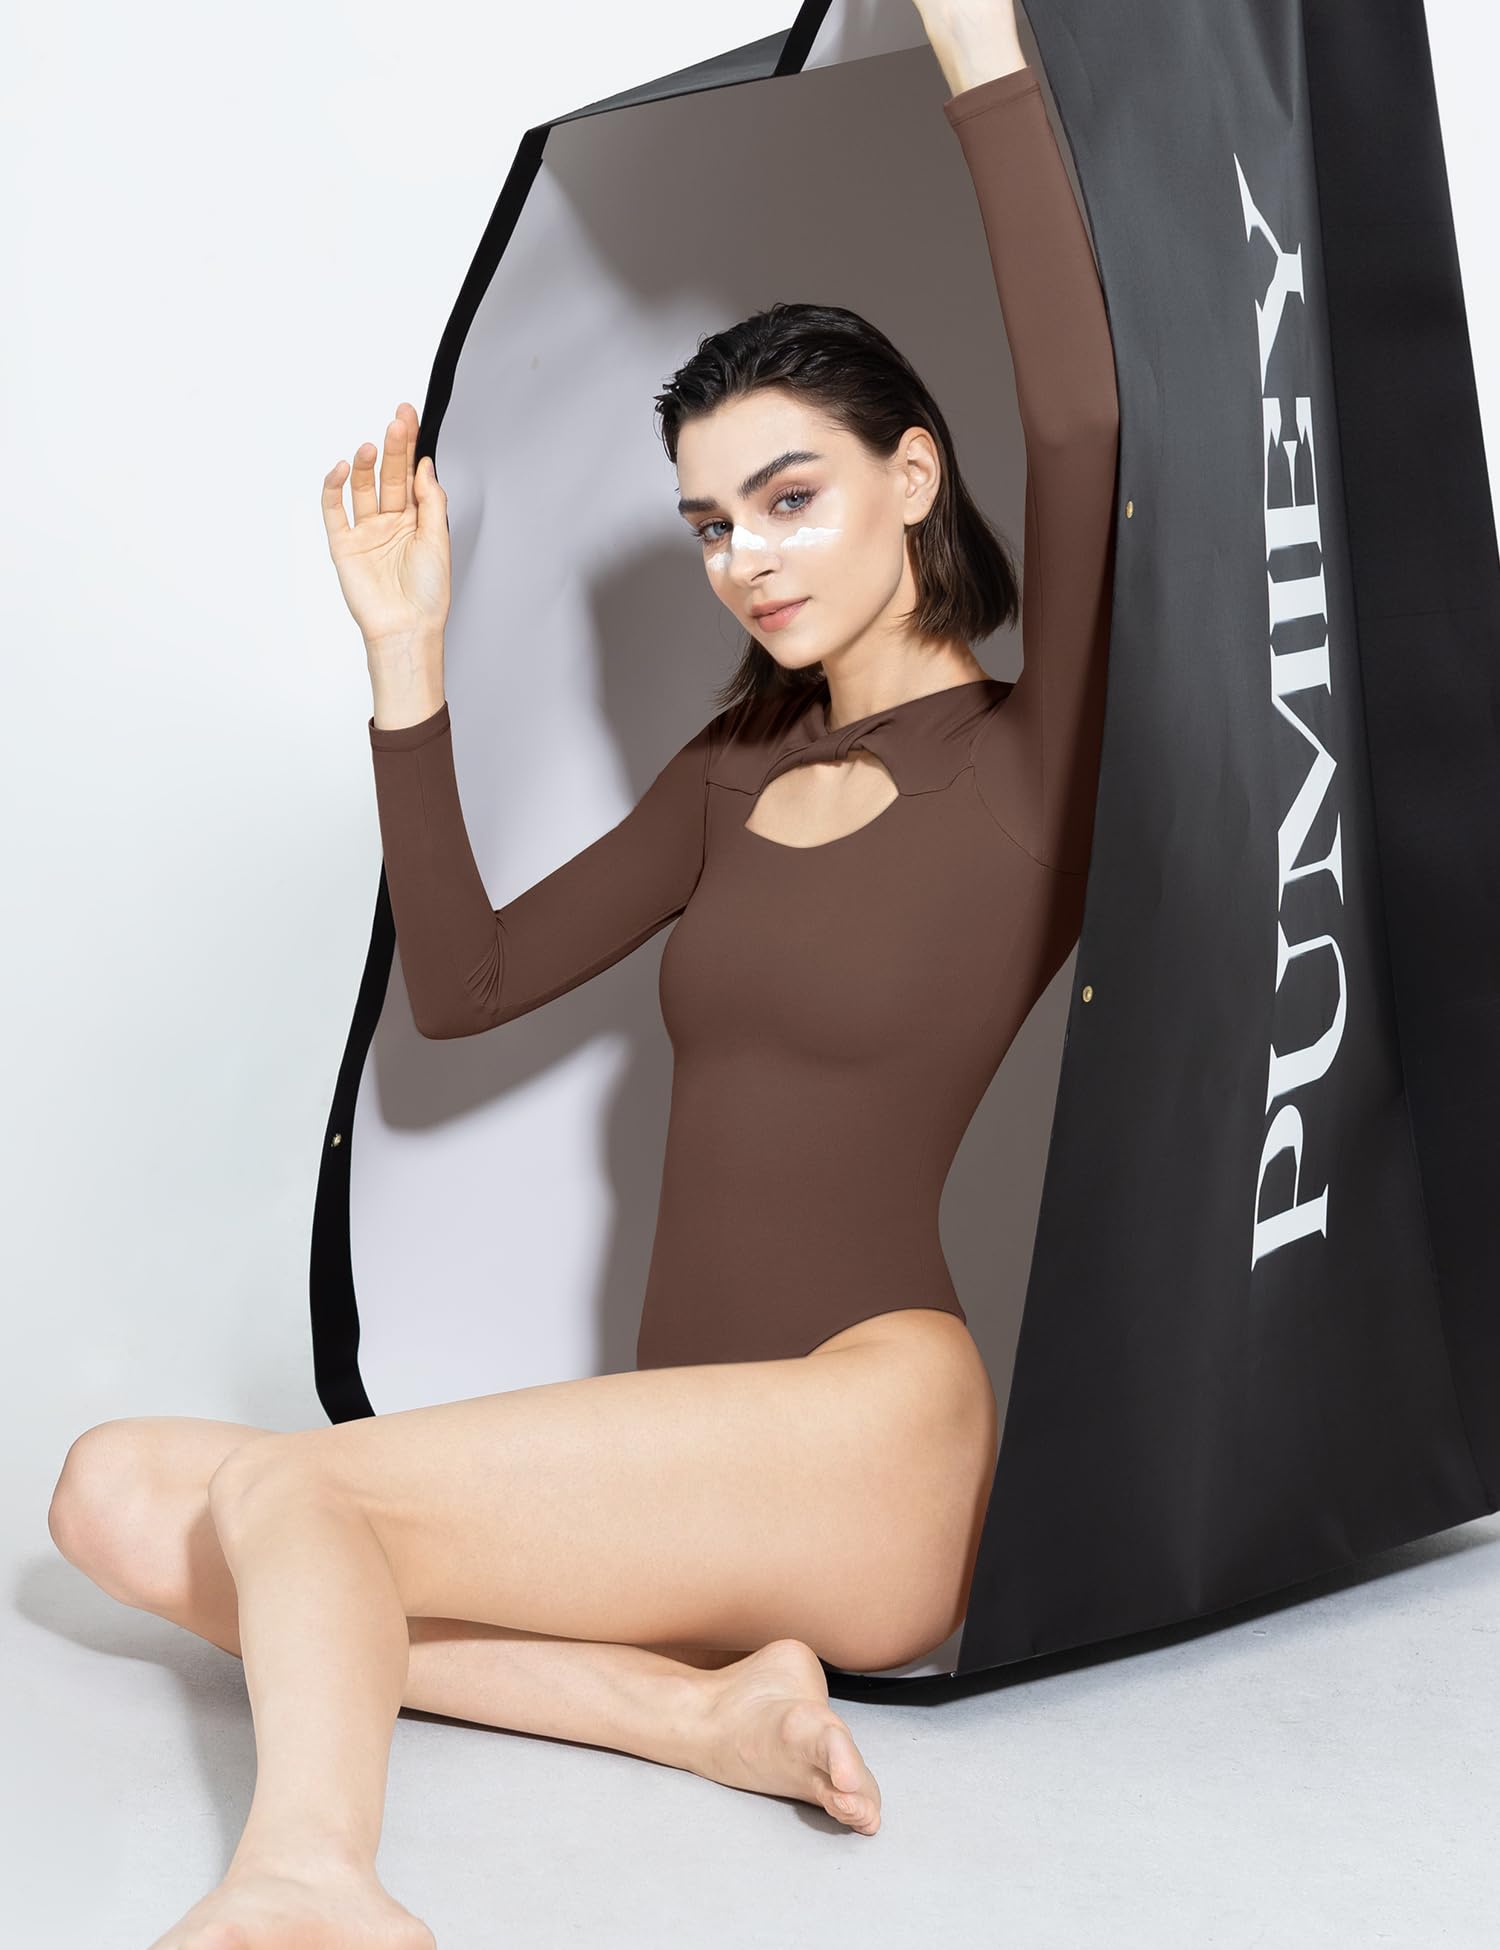 Pumiey-Your Body Makeup- Shop Your First Bodysuit